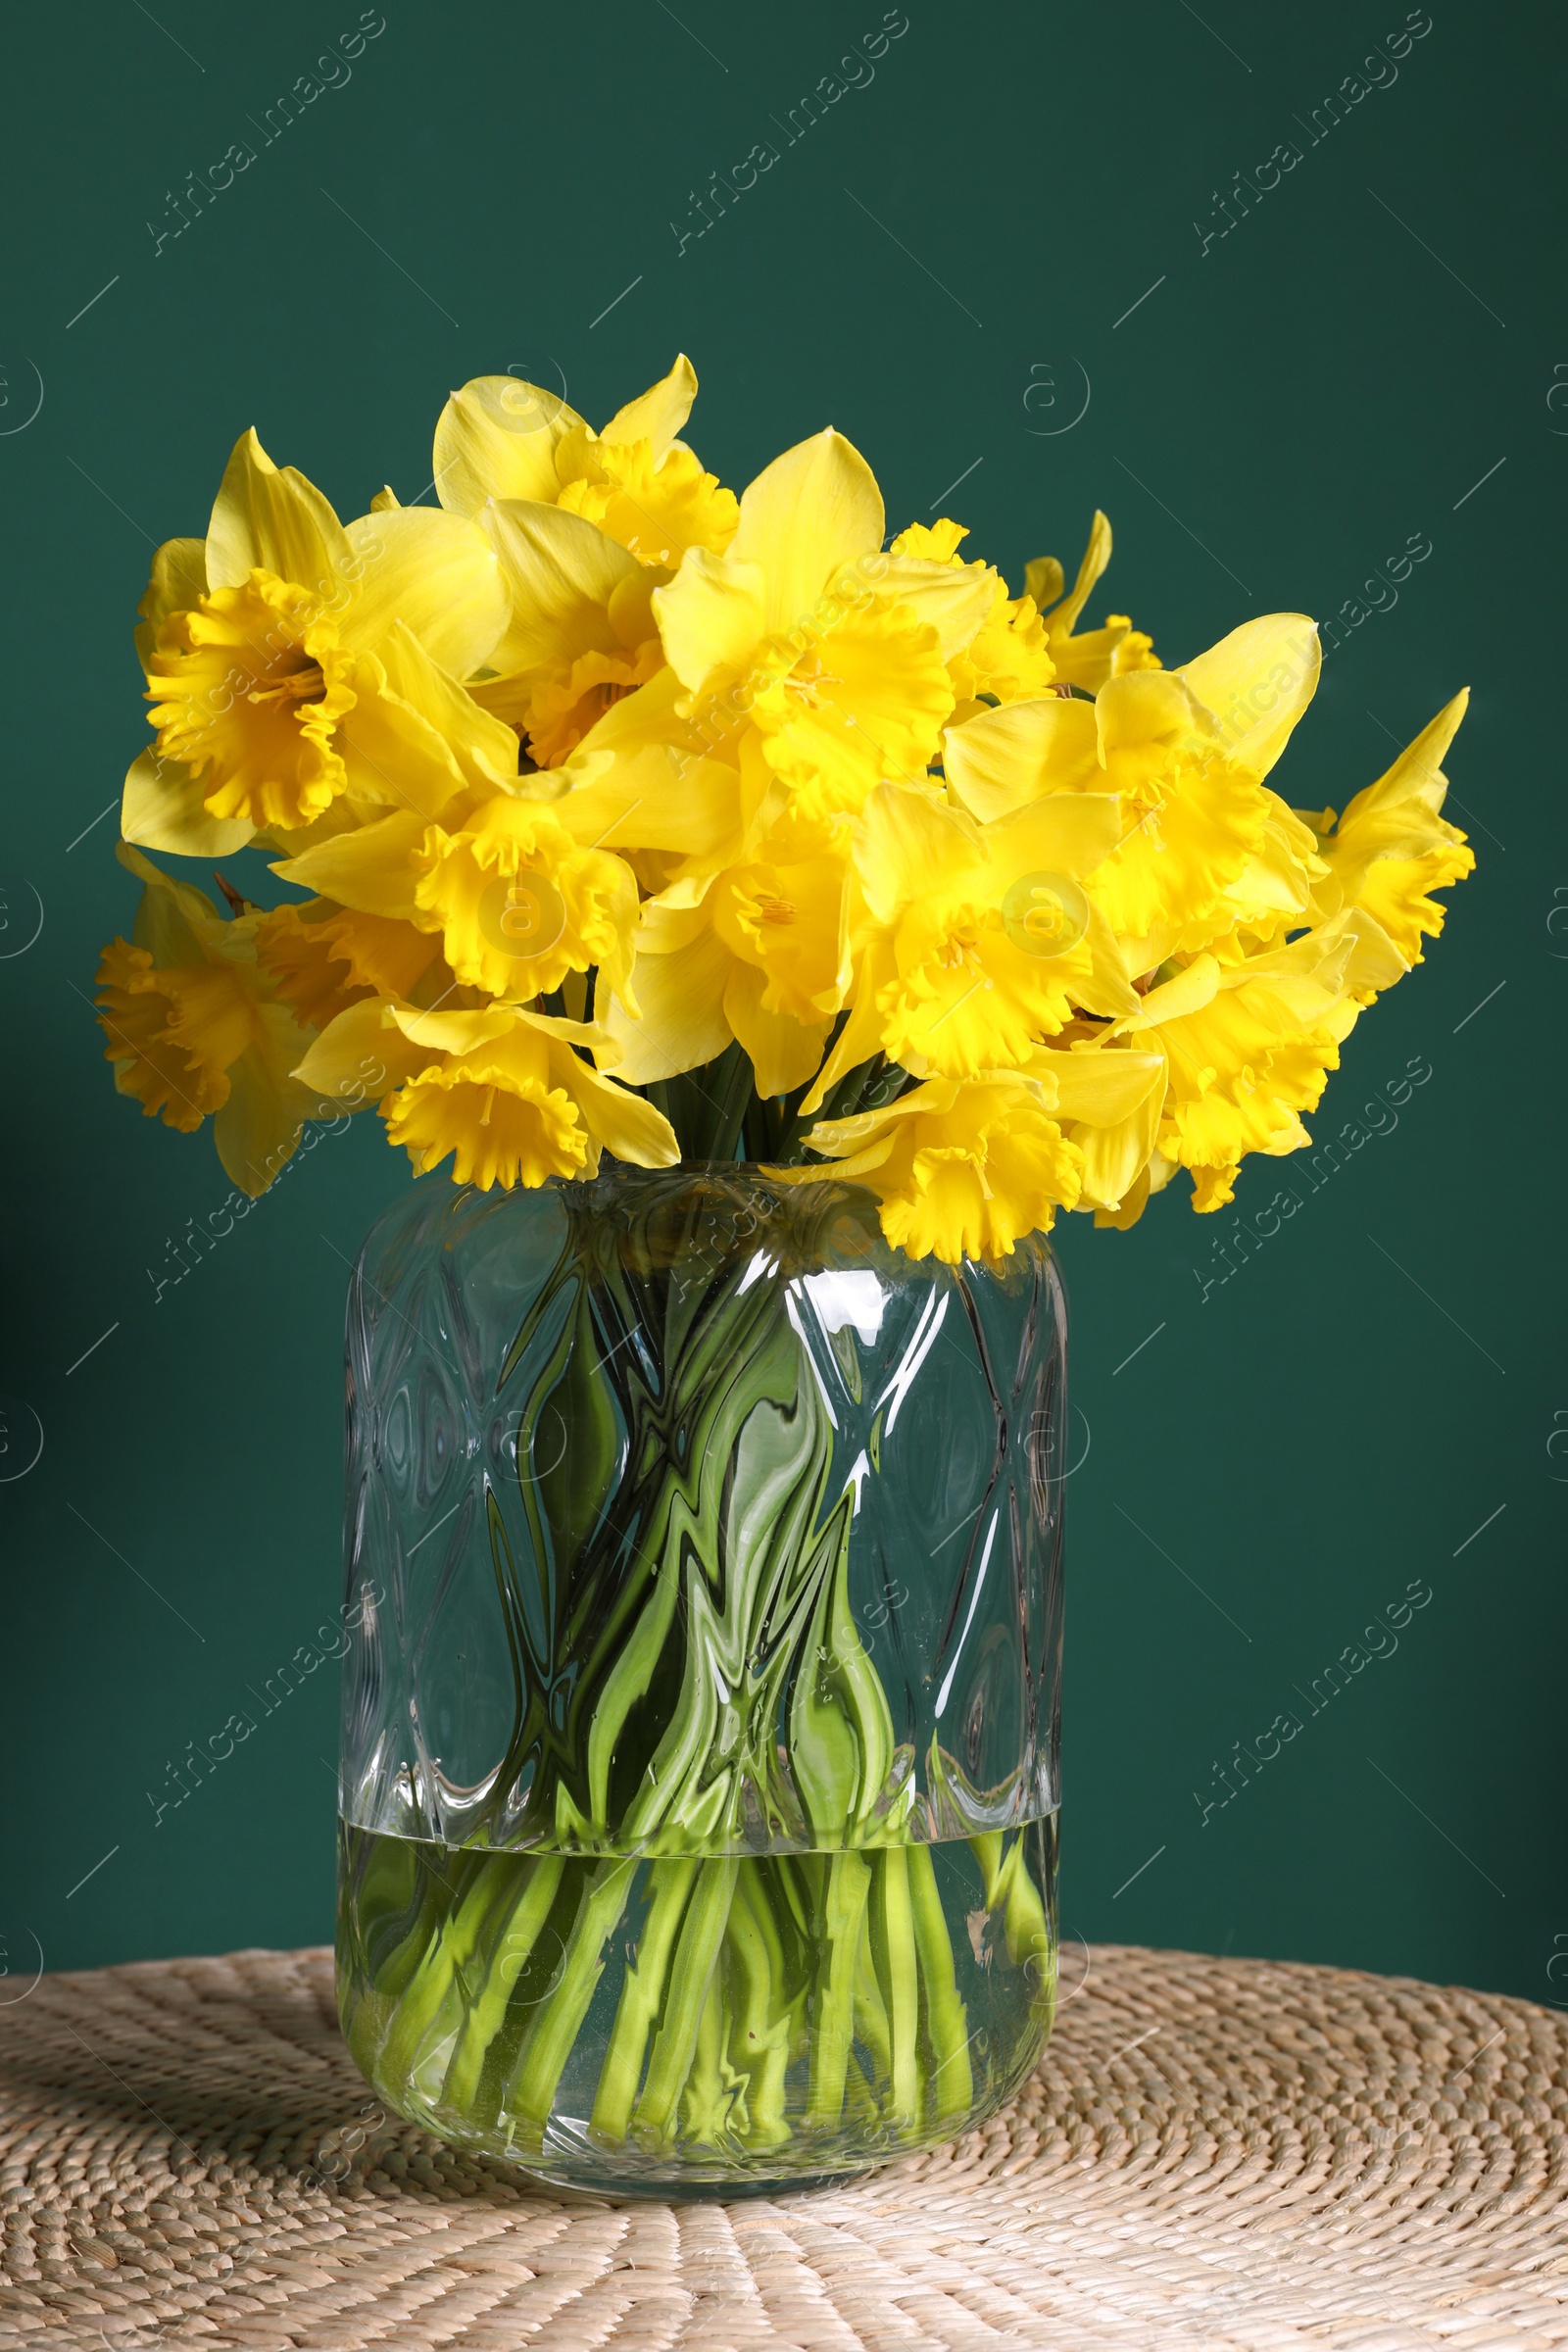 Photo of Beautiful daffodils in vase on wicker table against green background